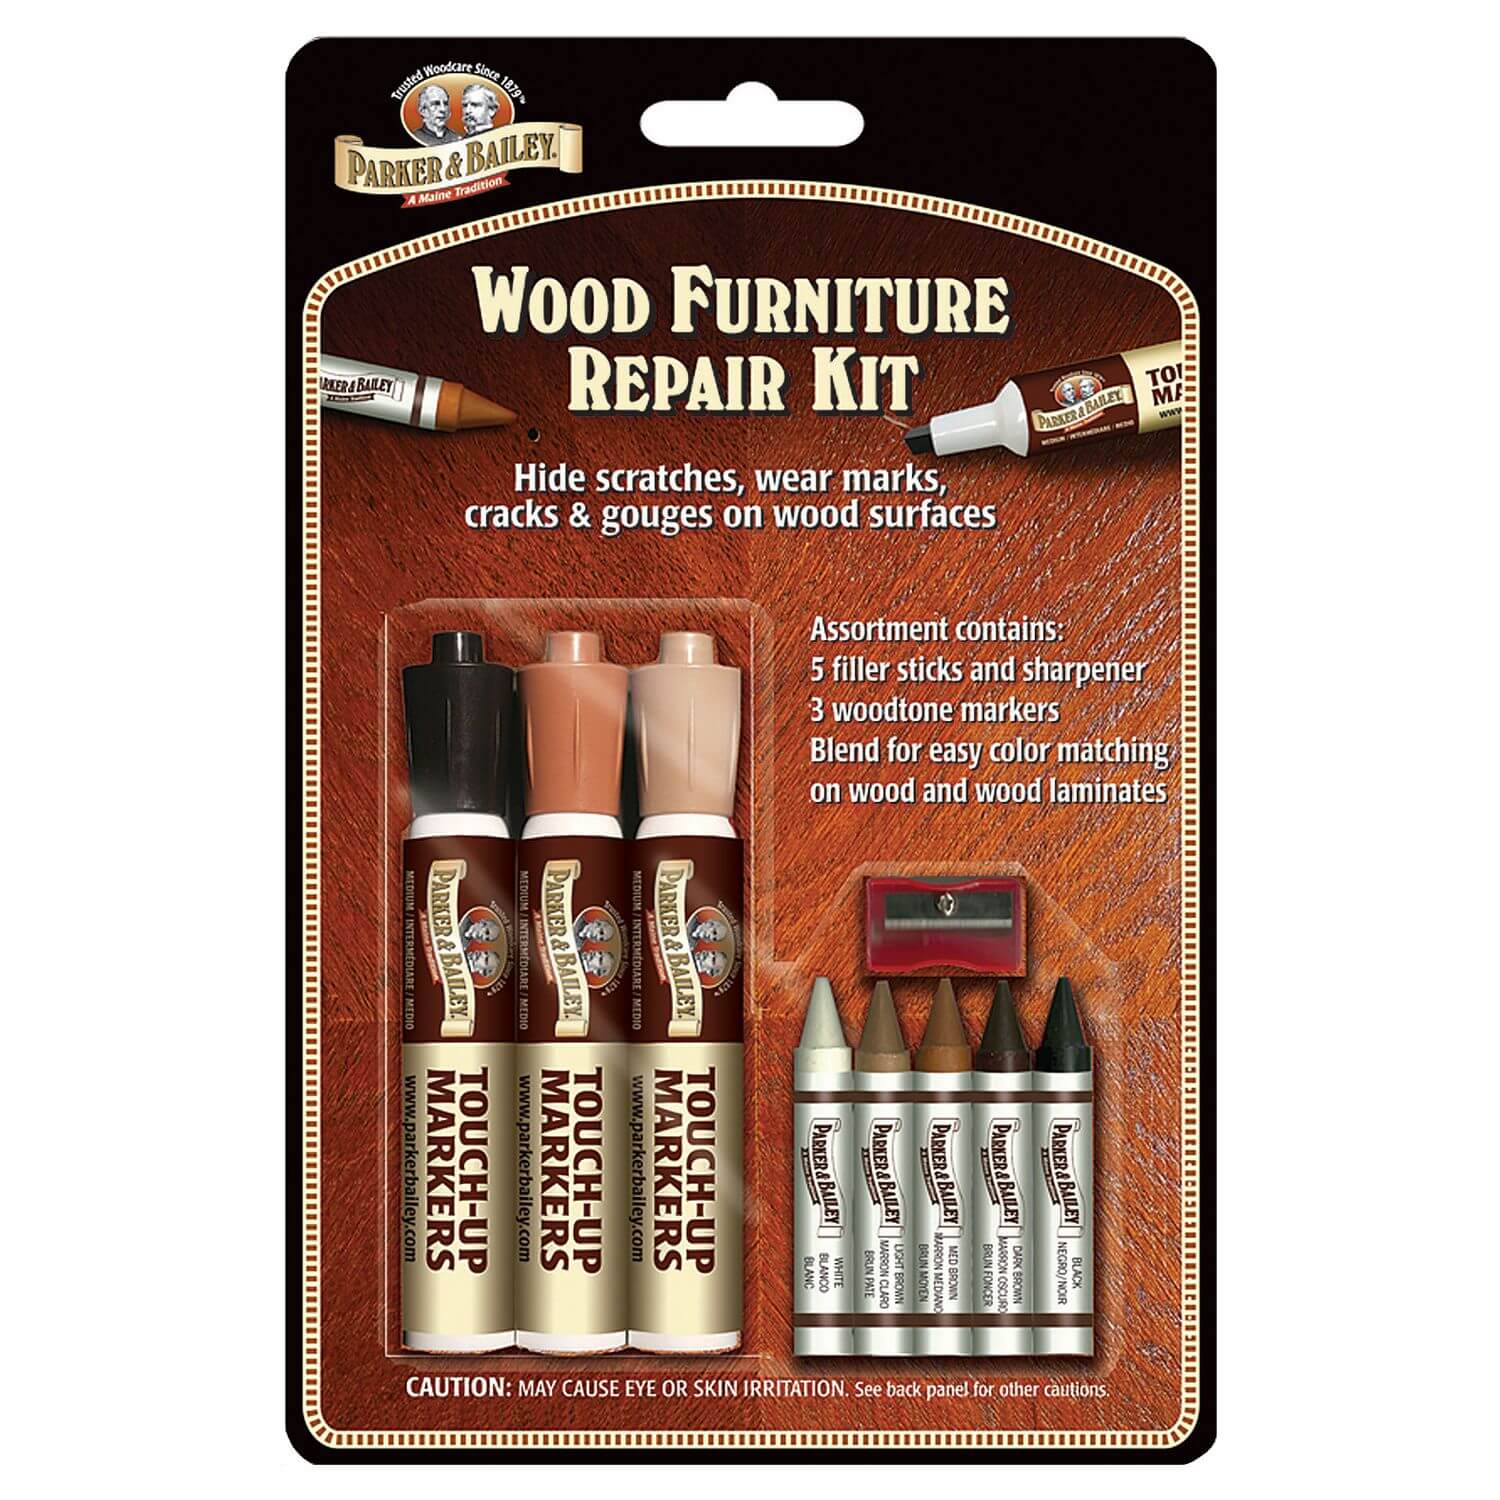 Parker & Bailey Wood Furniture Repair Kit - LAUNDRY - Cleaning - Soko and Co